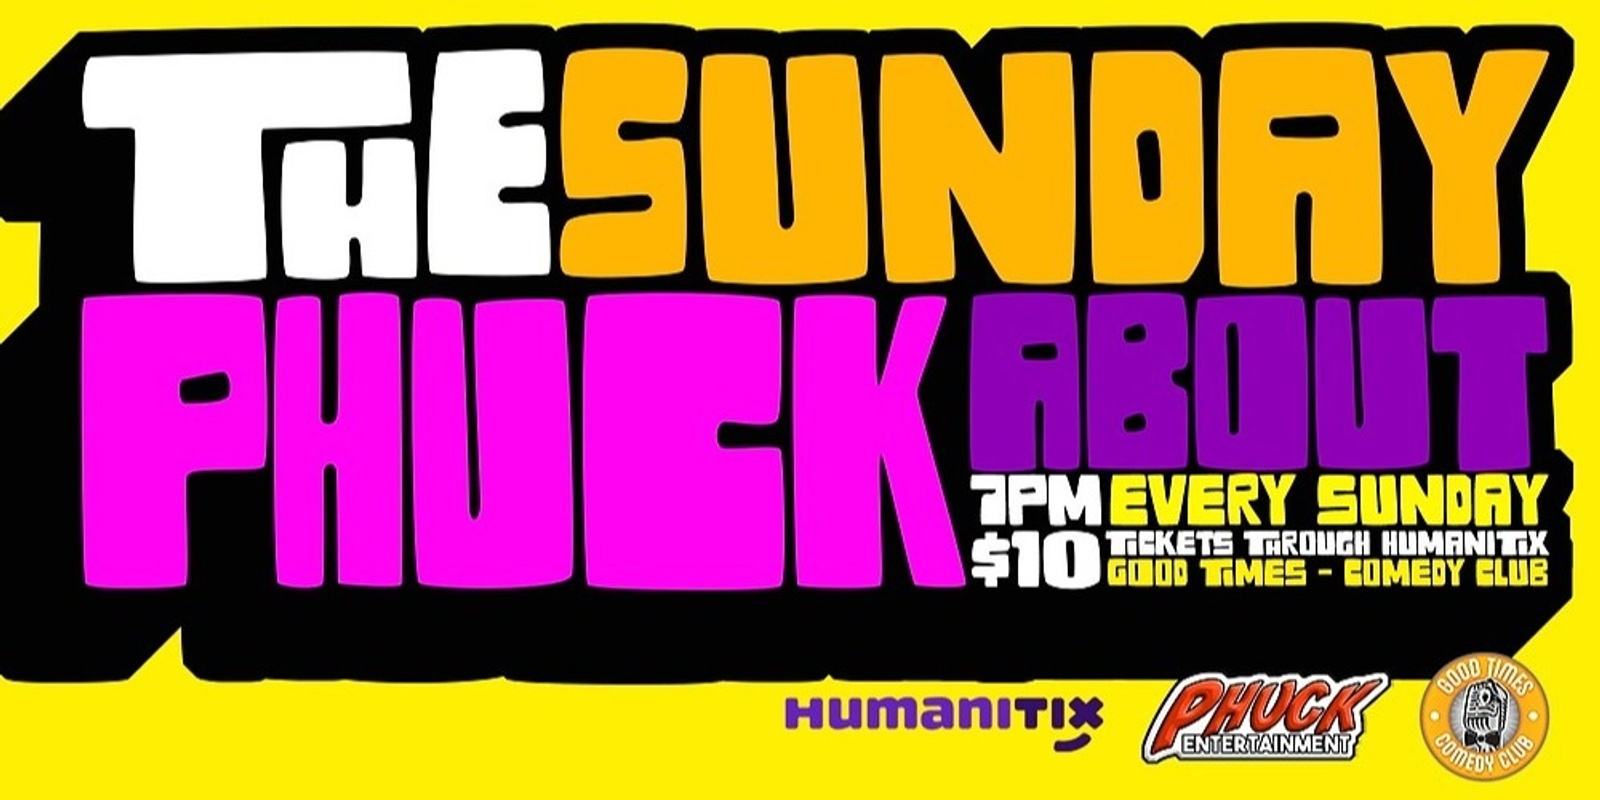 Banner image for The Sunday PHUCKabout